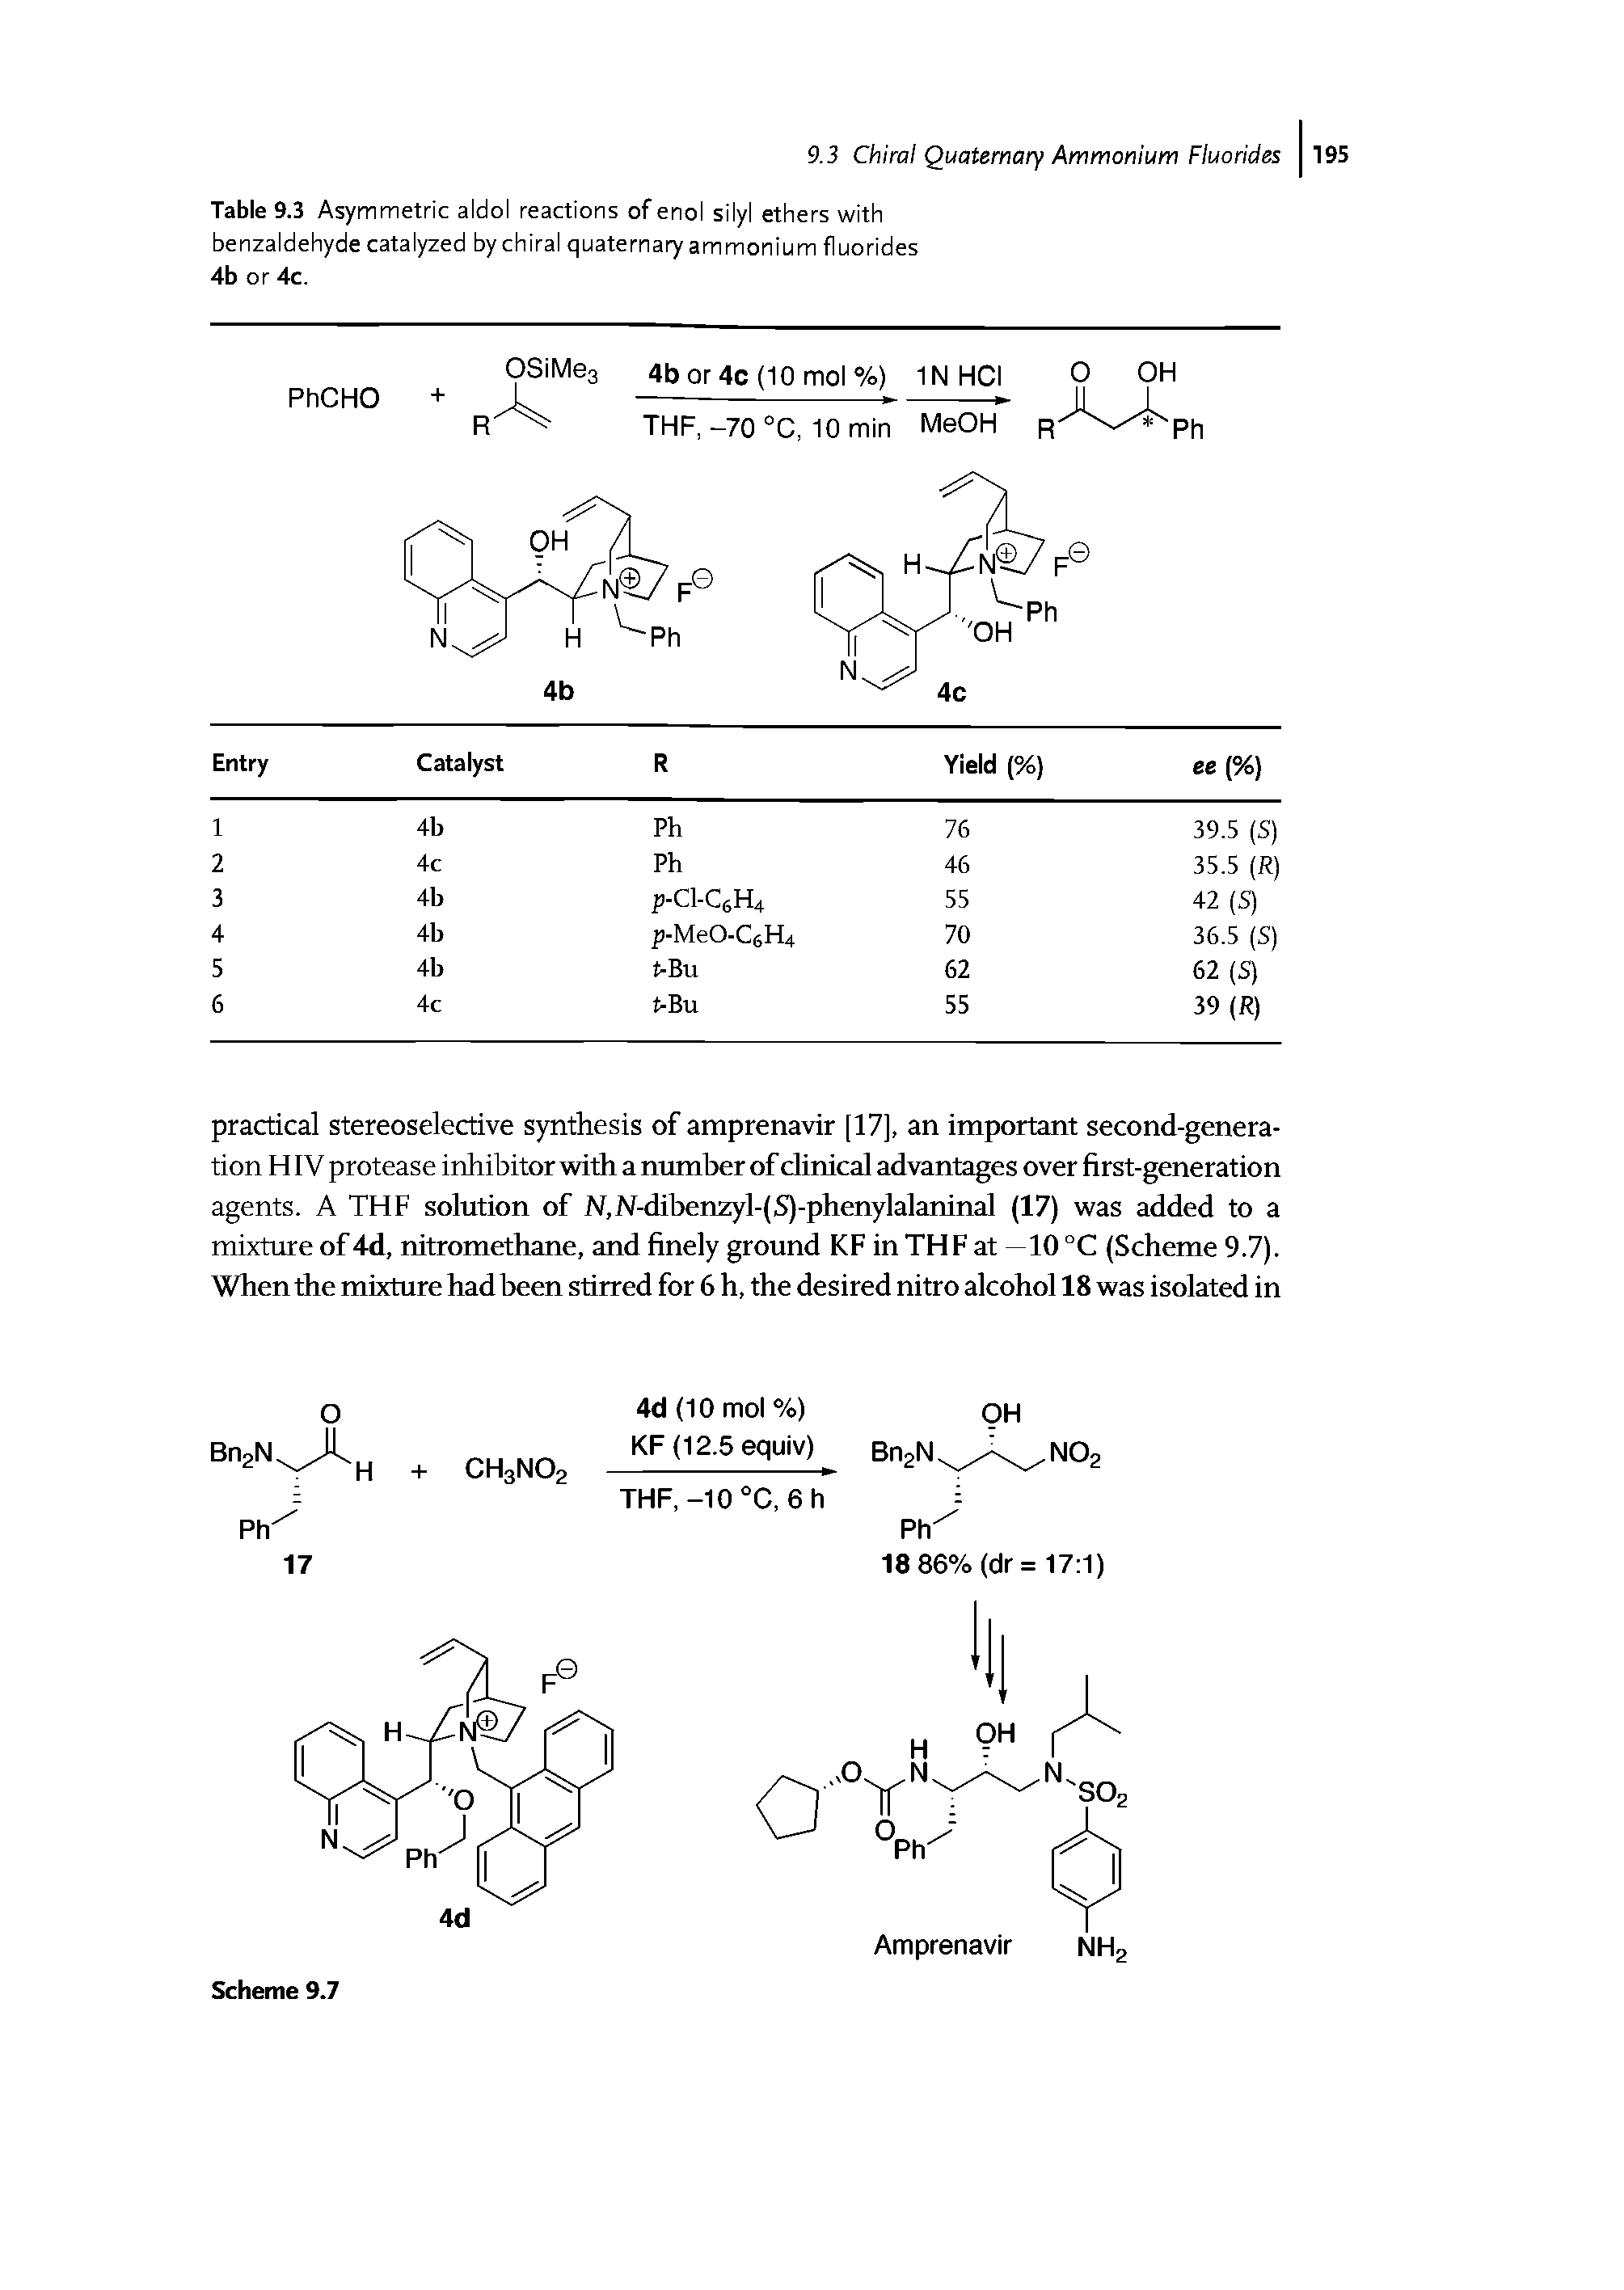 Table 9.3 Asymmetric aldol reactions of enol silyl ethers with benzaldehyde catalyzed by chiral quaterna7 ammonium fluorides 4b or 4c.